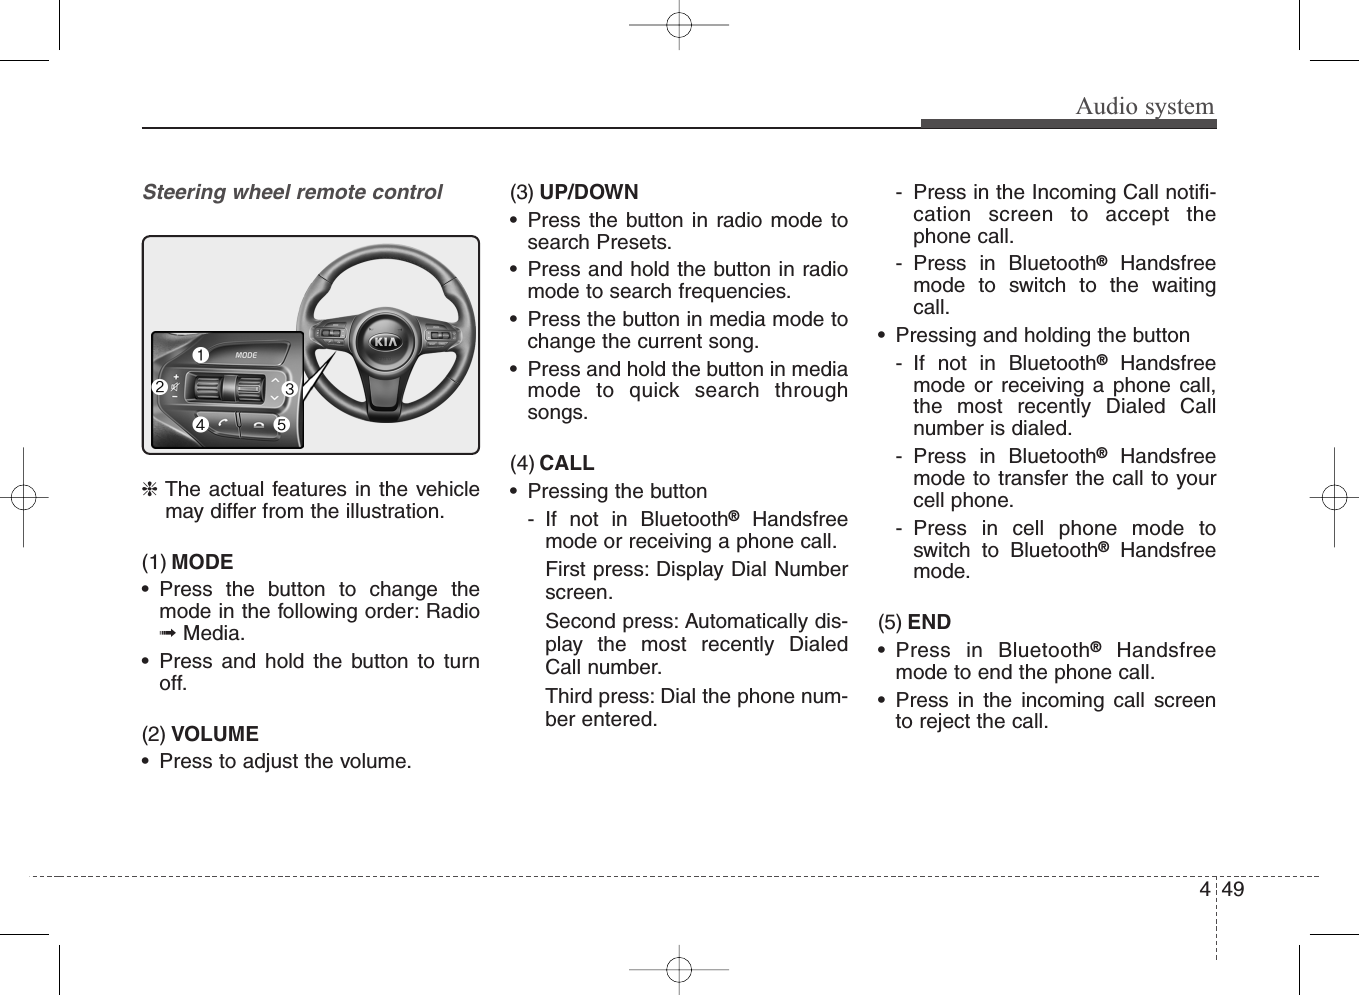 Audio systemSteering wheel remote control❈The actual features in the vehiclemay differ from the illustration.(1) MODE• Press the button to change themode in the following order: Radio➟Media.• Press and hold the button to turnoff.(2) VOLUME• Press to adjust the volume.(3) UP/DOWN• Press the button in radio mode tosearch Presets.• Press and hold the button in radiomode to search frequencies.• Press the button in media mode tochange the current song.• Press and hold the button in mediamode to quick search throughsongs.(4) CALL• Pressing the button- If not in Bluetooth®Handsfreemode or receiving a phone call. First press: Display Dial Numberscreen.Second press: Automatically dis-play the most recently DialedCall number.Third press: Dial the phone num-ber entered.- Press in the Incoming Call notifi-cation screen to accept thephone call.- Press in Bluetooth®Handsfreemode to switch to the waitingcall.• Pressing and holding the button- If not in Bluetooth®Handsfreemode or receiving a phone call,the most recently Dialed Callnumber is dialed.- Press in Bluetooth®Handsfreemode to transfer the call to yourcell phone.- Press in cell phone mode toswitch to Bluetooth®Handsfreemode.(5) END• Press in Bluetooth®Handsfreemode to end the phone call.• Press in the incoming call screento reject the call.494